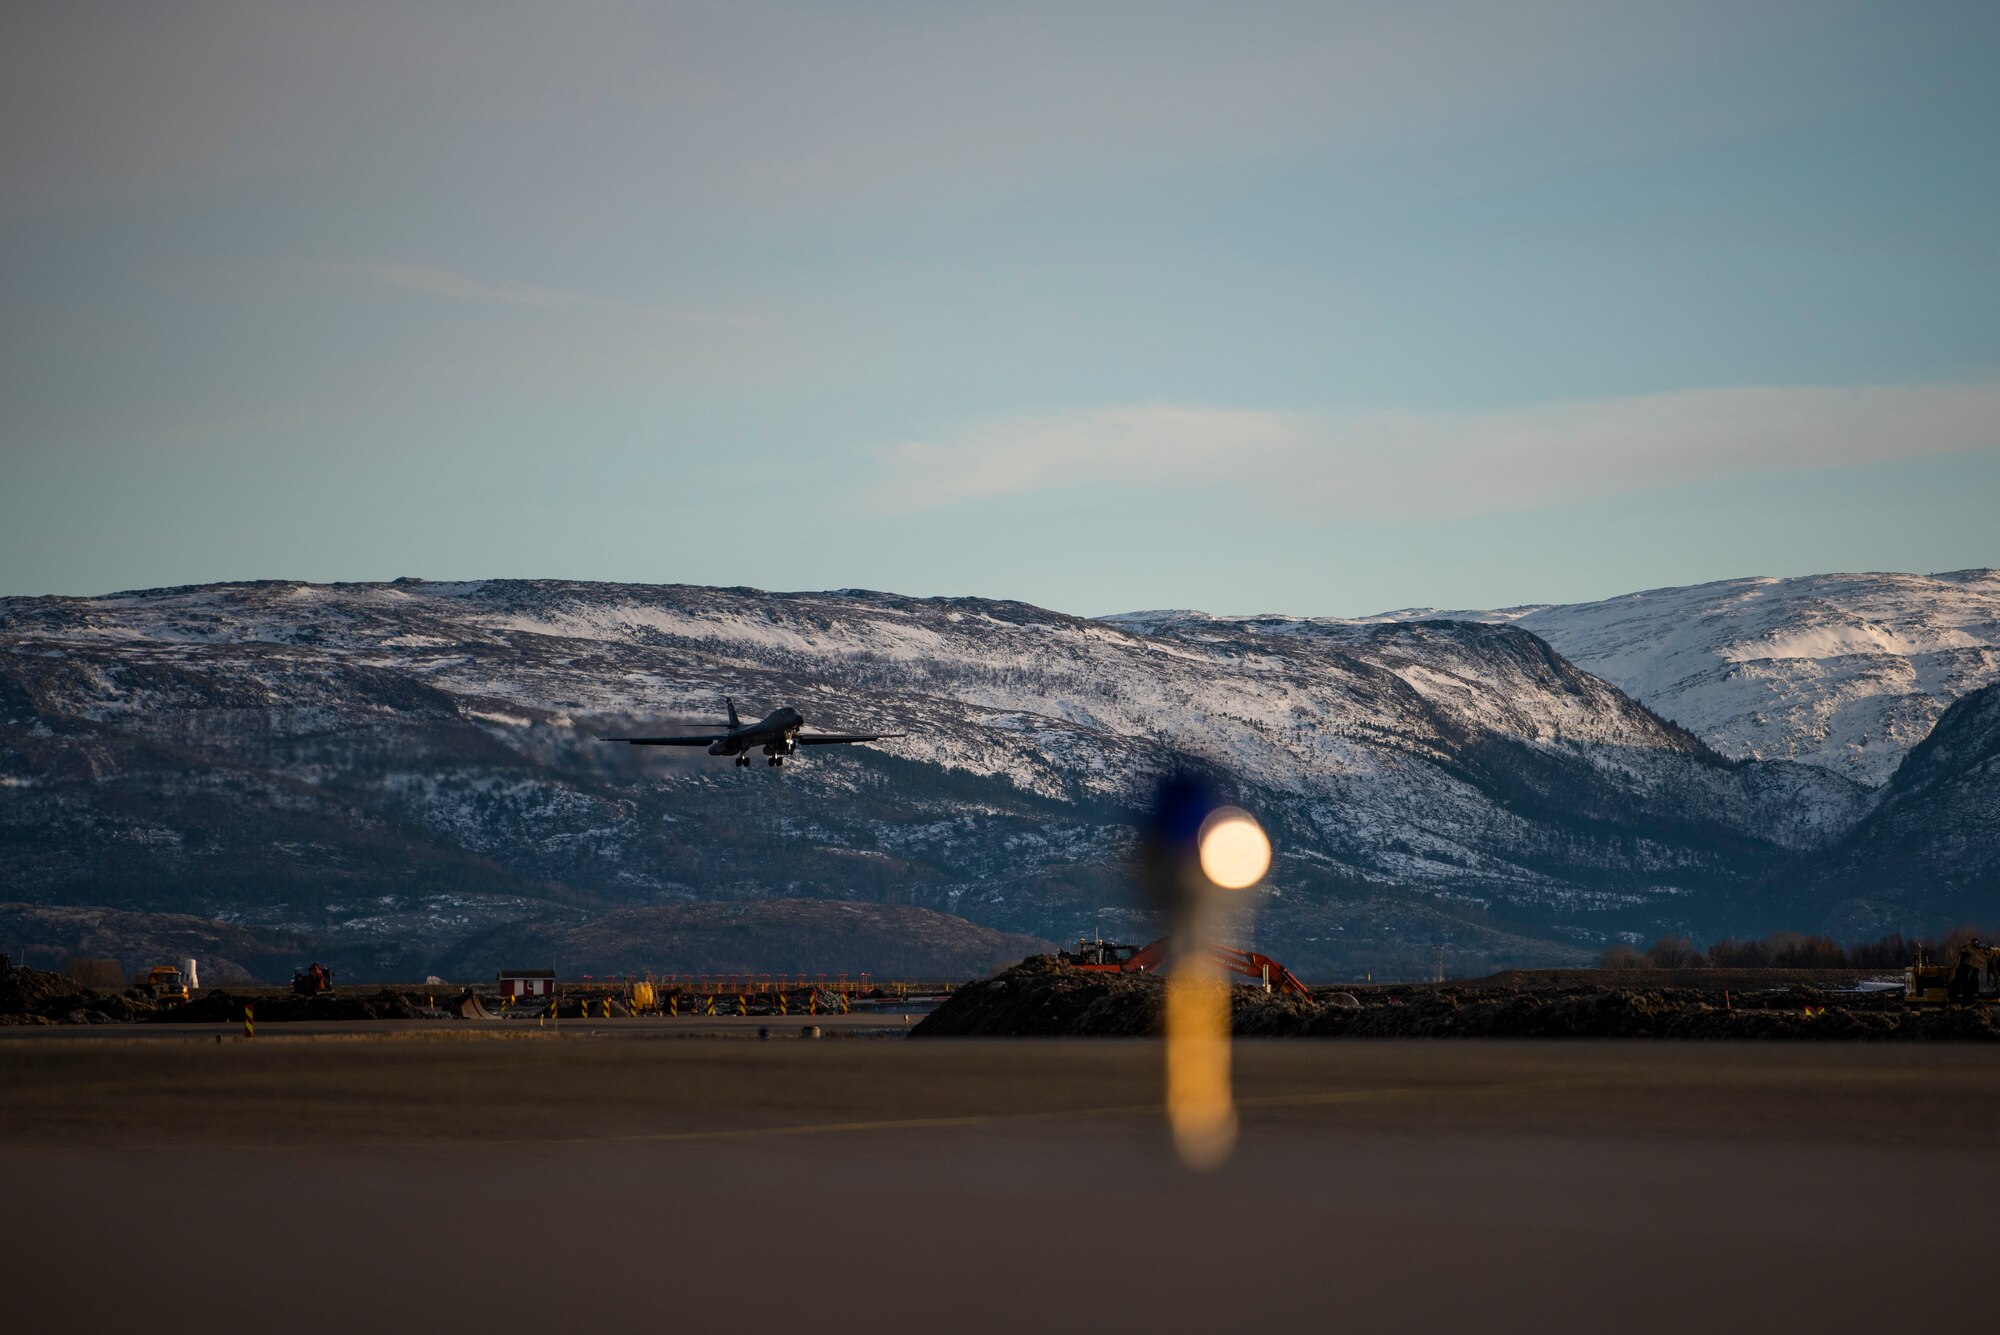 A B-1B Lancer assigned to the 9th Expeditionary Bomb Squadron prepares to land at Ørland Air Force Station, Norway, March 14, 2021. The 9th EBS operated out of Ørland AFS, Norway where they conducted a series of Bomber Task Force Europe training missions. These bomber missions are representative of the U.S. commitment to our allies and enhancing regional security. (U.S. Air Force photo by Airman 1st Class Colin Hollowell)